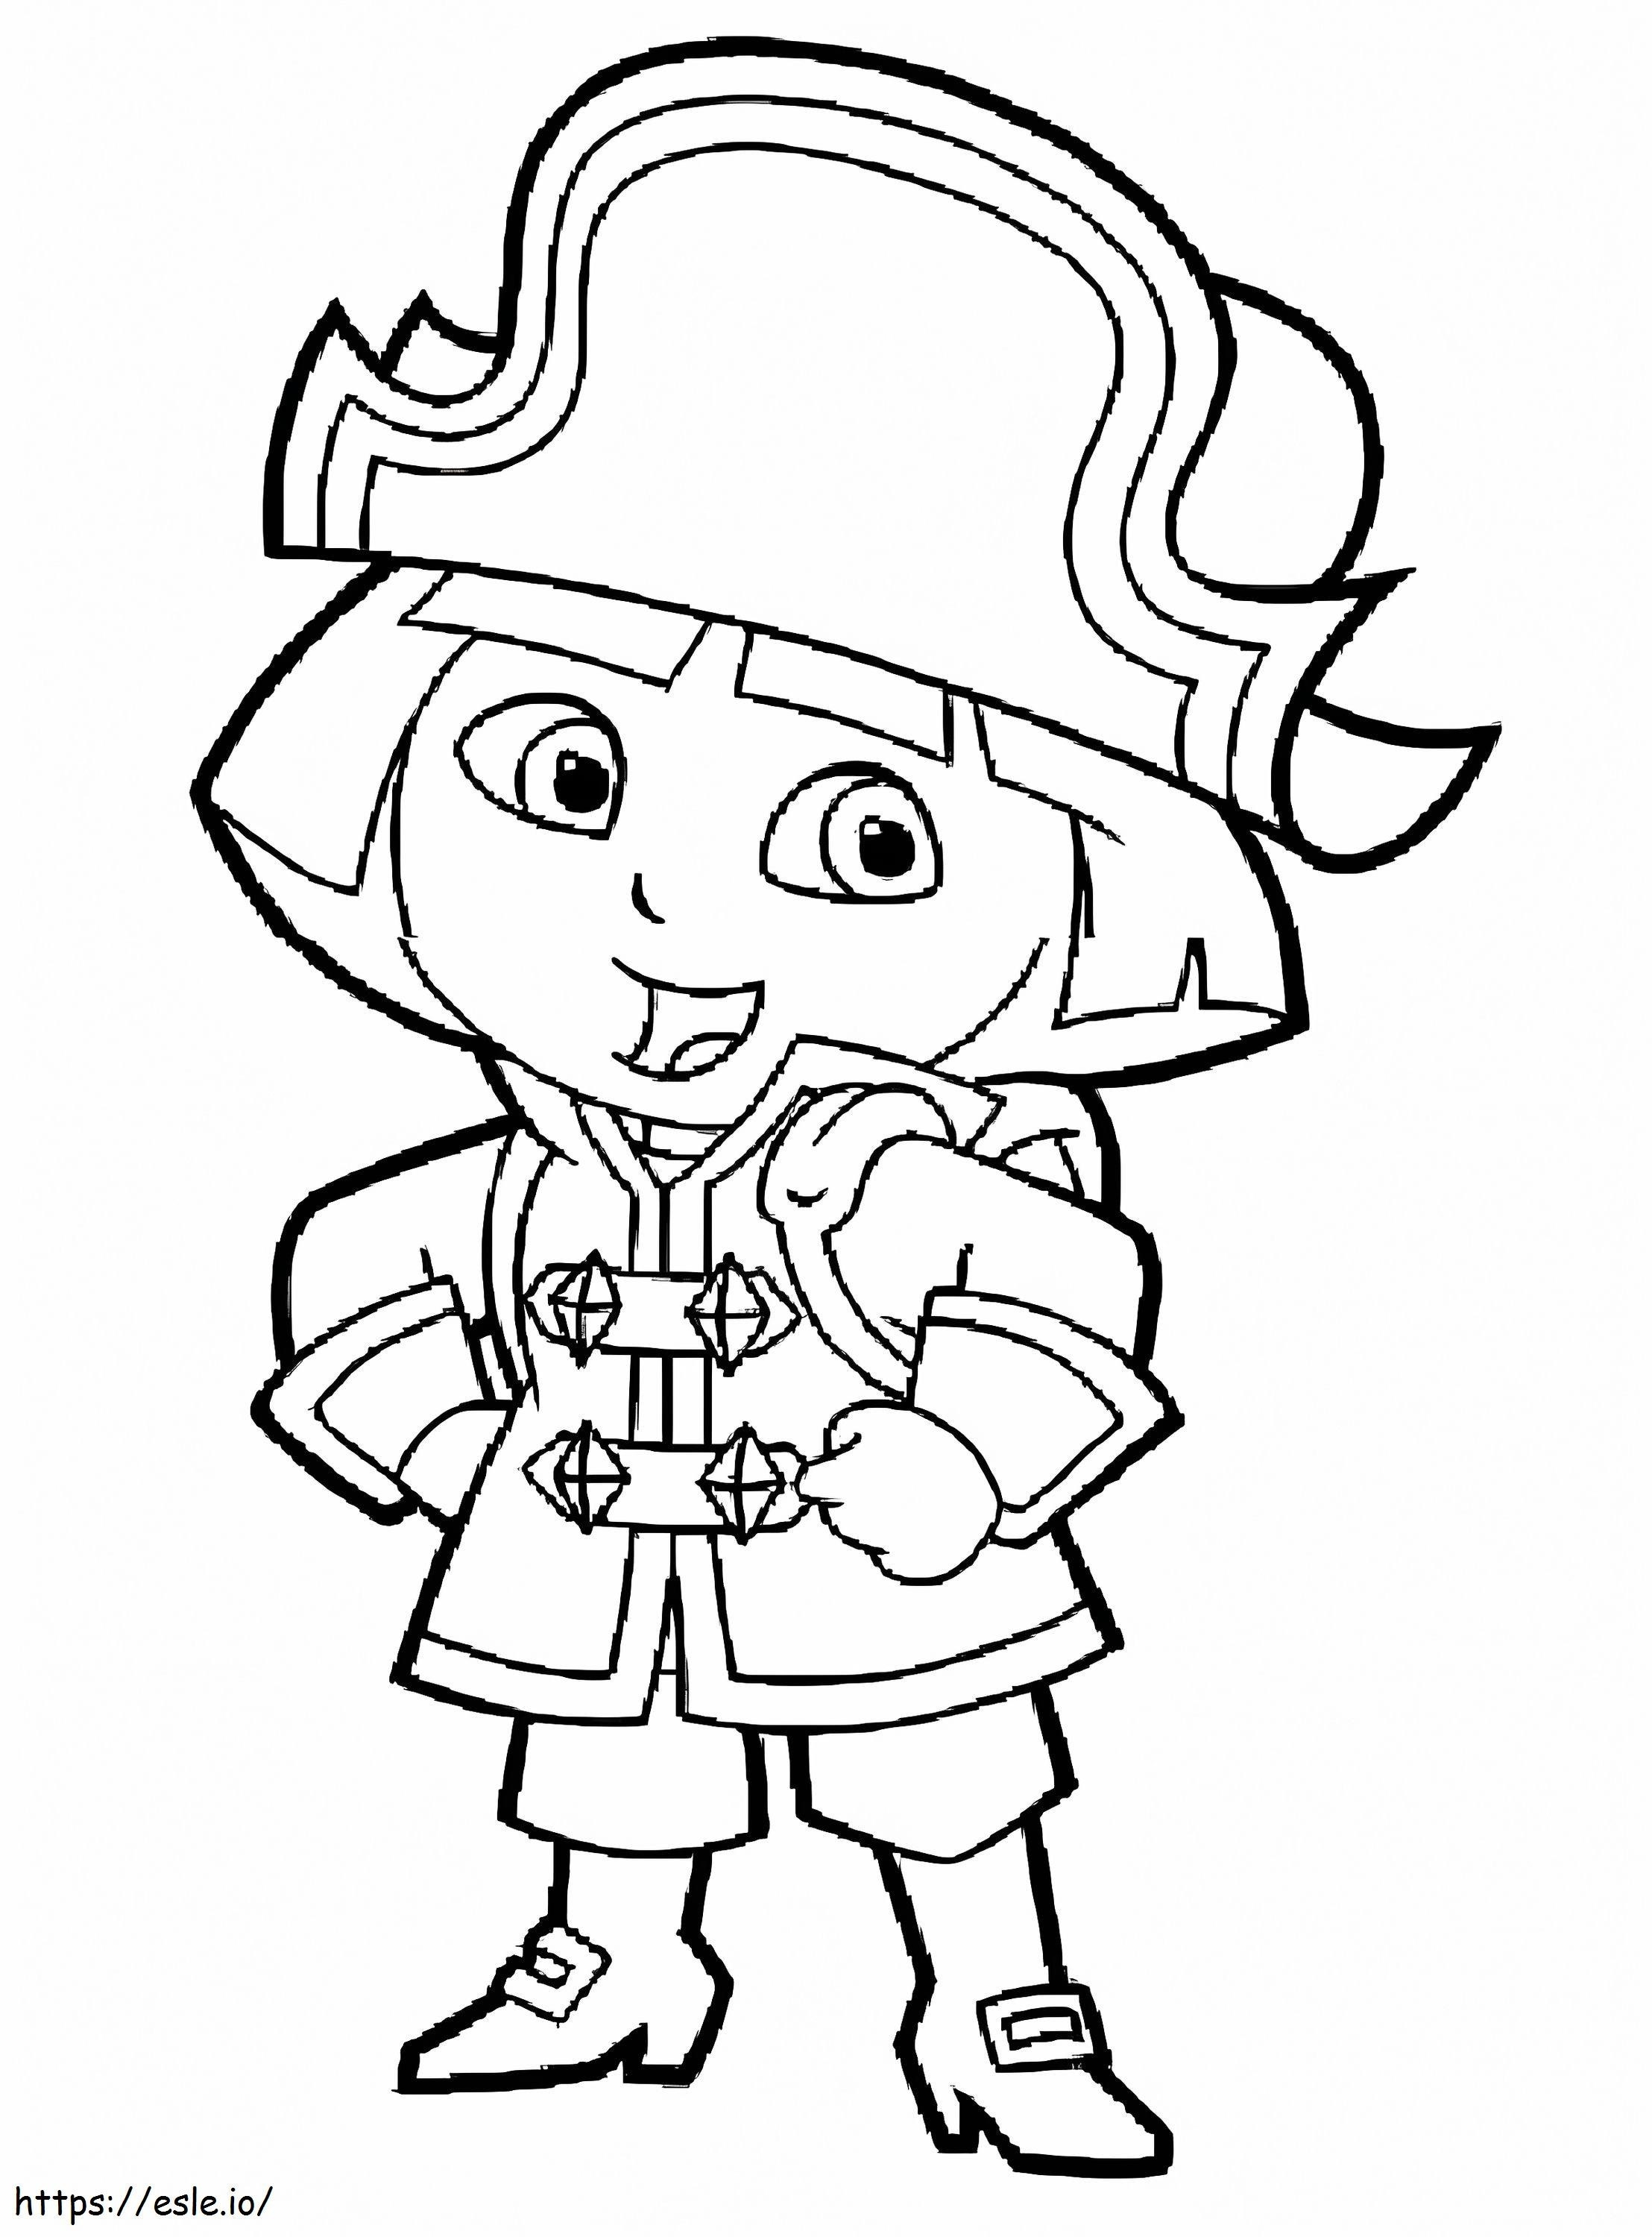 Dora The Pirate coloring page